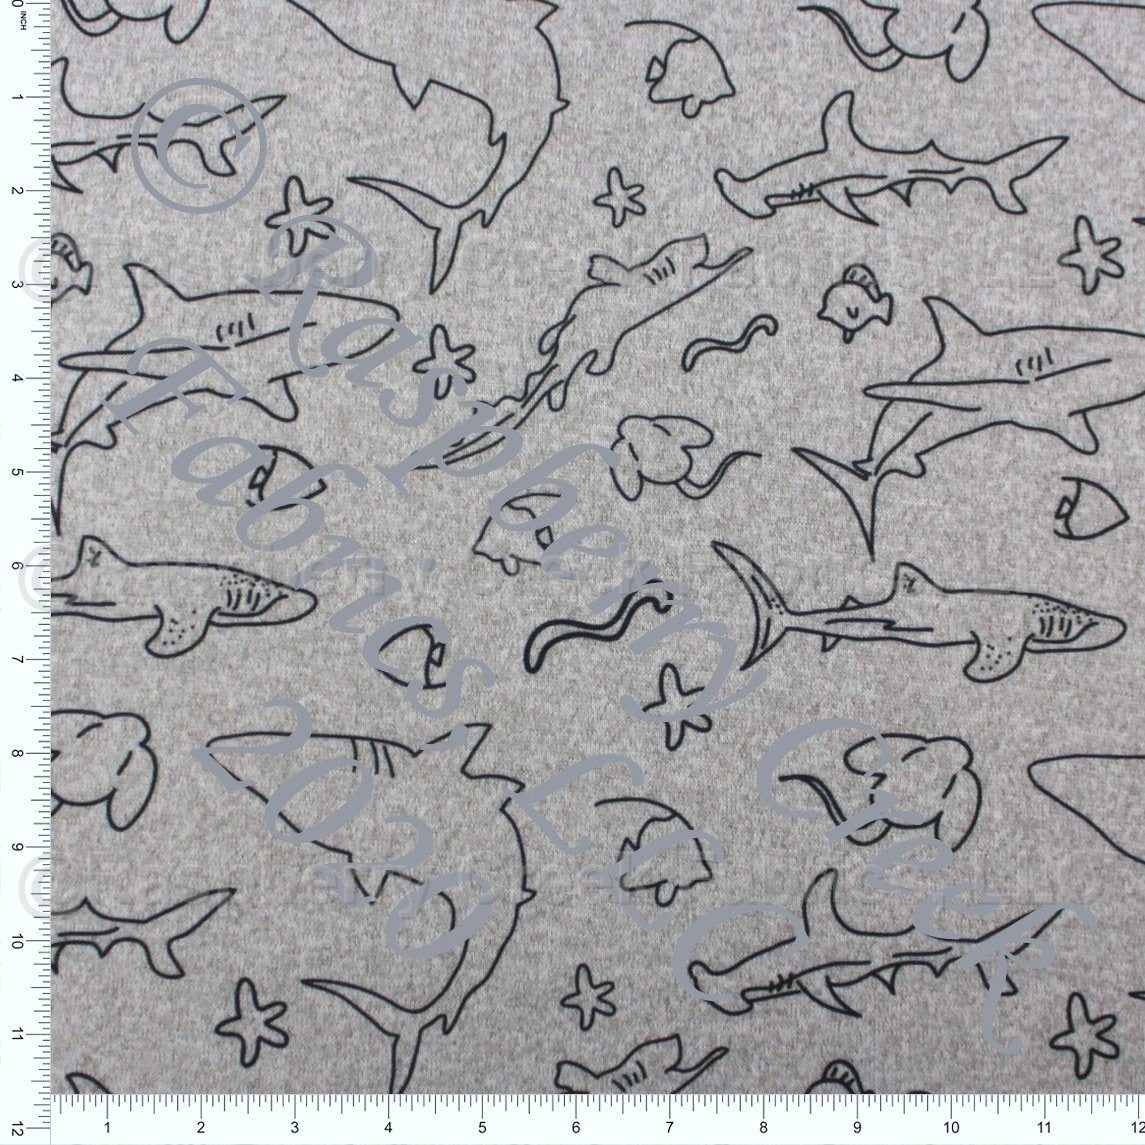 Black and Heathered Grey Shark Silhouette Brushed Heathered Hacci Sweater Knit Fabric, By Brittney Laidlaw for CLUB Fabrics Fabric, Raspberry Creek Fabrics, watermarked